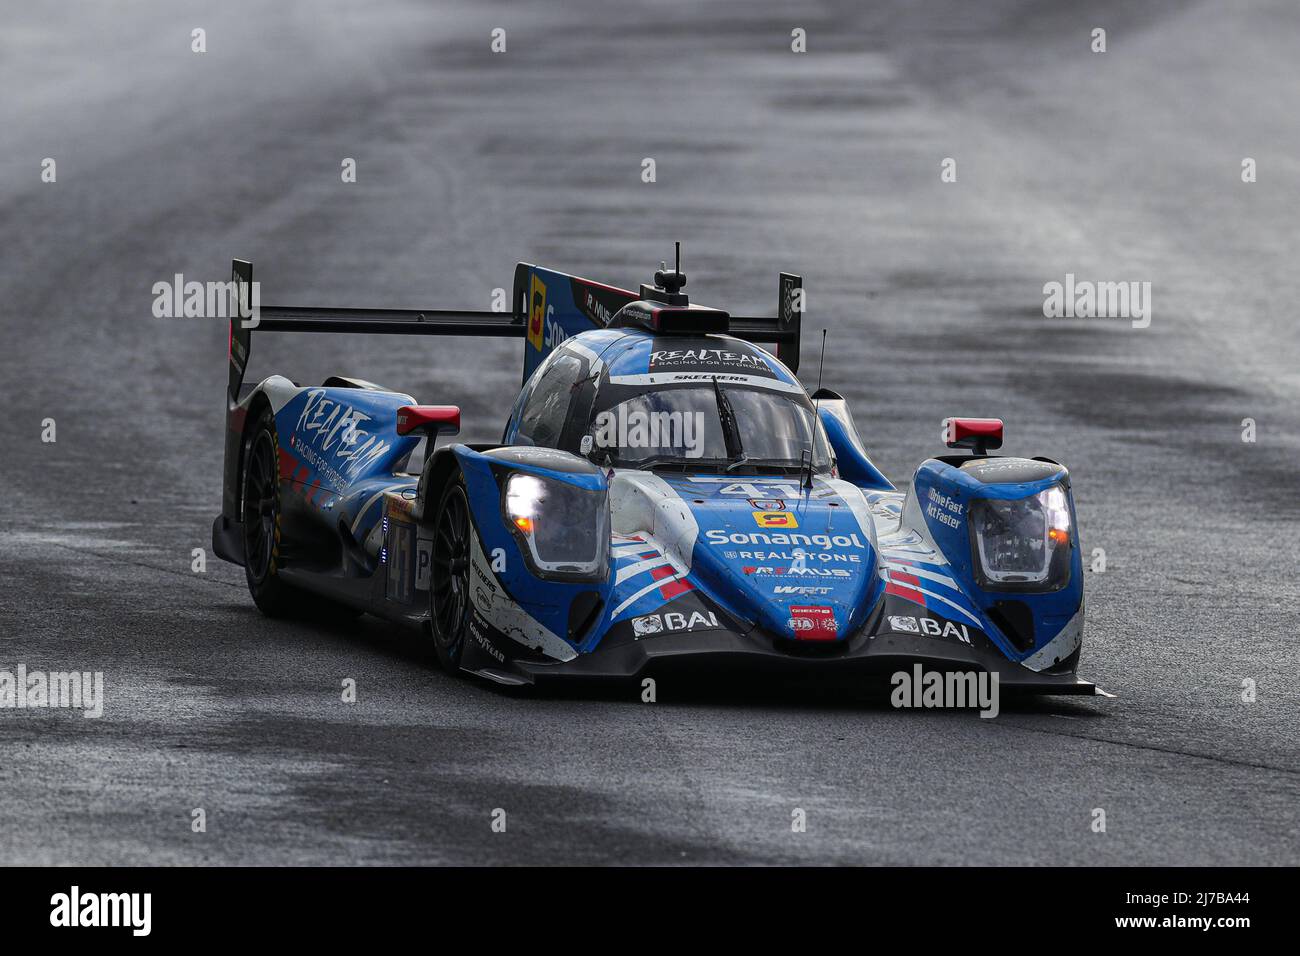 (220508) -- STAVELOT, May 8, 2022 (Xinhua) -- Realteam by WRT's Rui Andrade, Ferdinand Habsburg-Lothringen, Norman Nato drive the Oreca 07 Gibson of LMP2 class during the 6 Hours Of Spa-Francorchamps, the second round of the 2022 FIA World Endurance Championship (WEC) at Circuit de Spa-Francorchamps in Stavelot in Belgium, May 7, 2022. (Xinhua/Zheng Huansong) Stock Photo